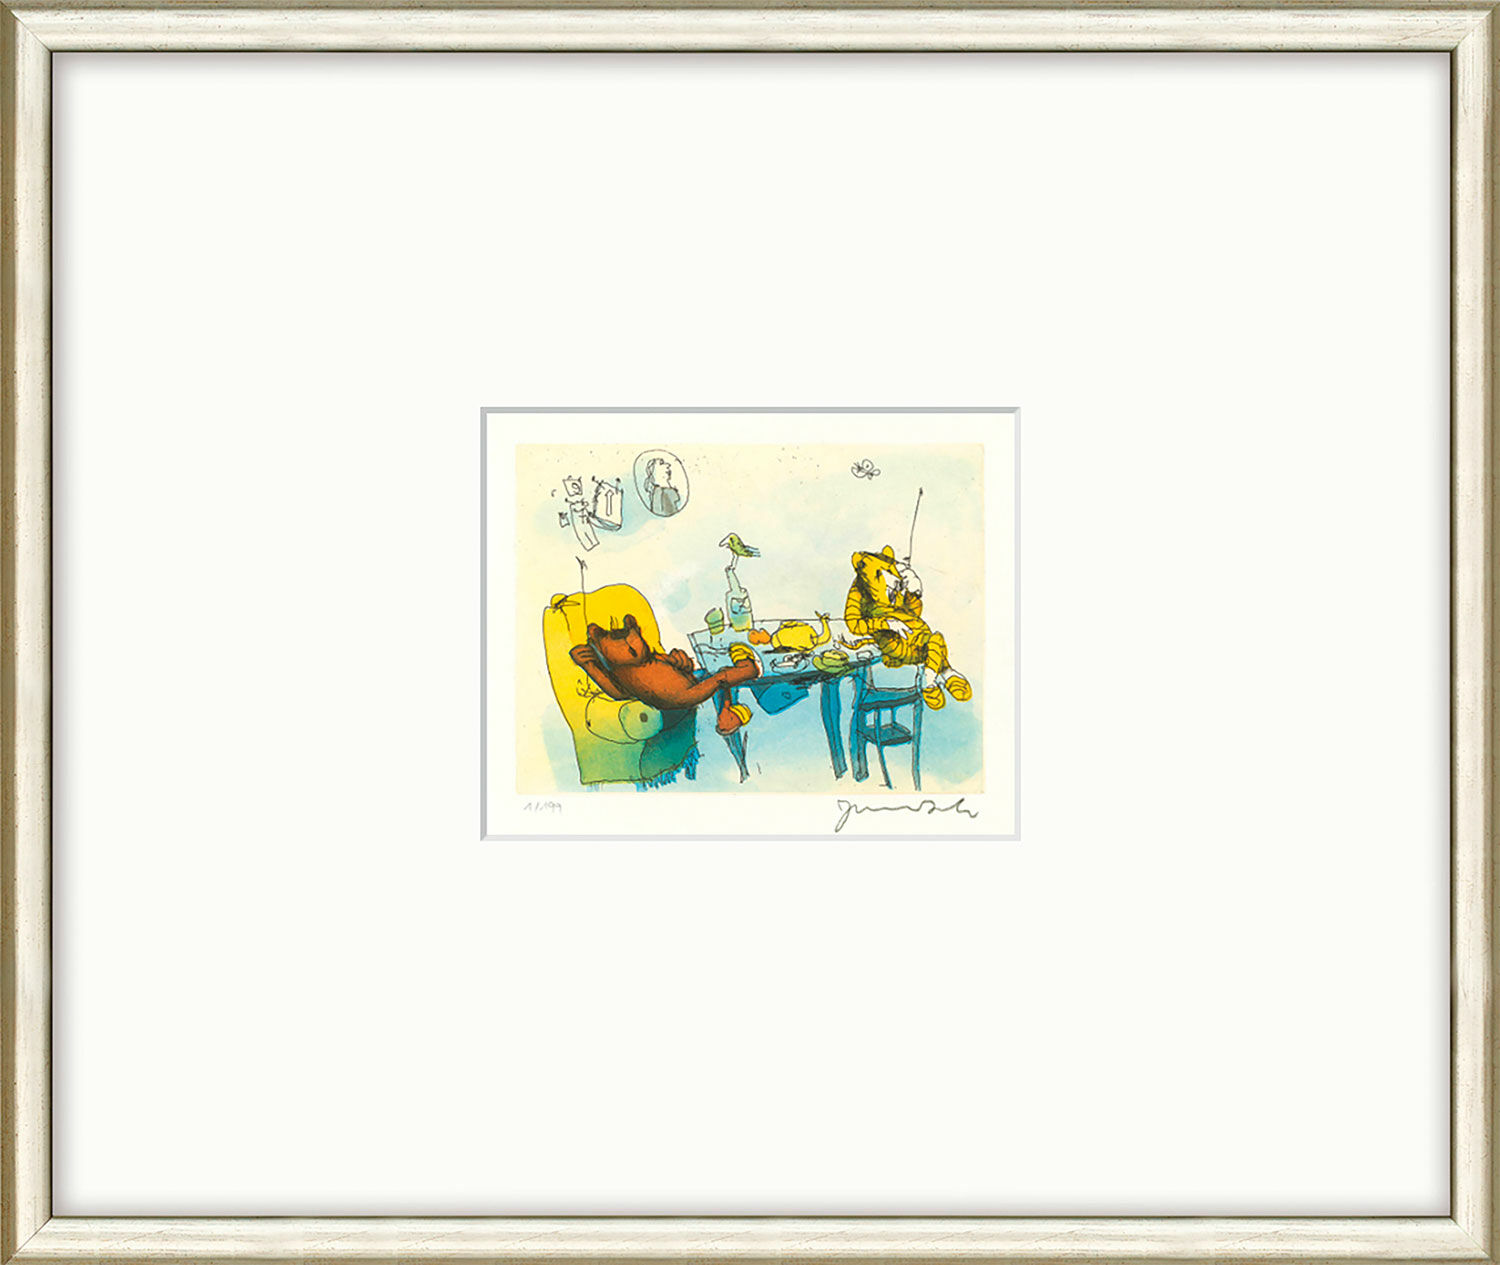 Picture "Here speaks the bear, and who speaks there?" (2022), framed by Janosch